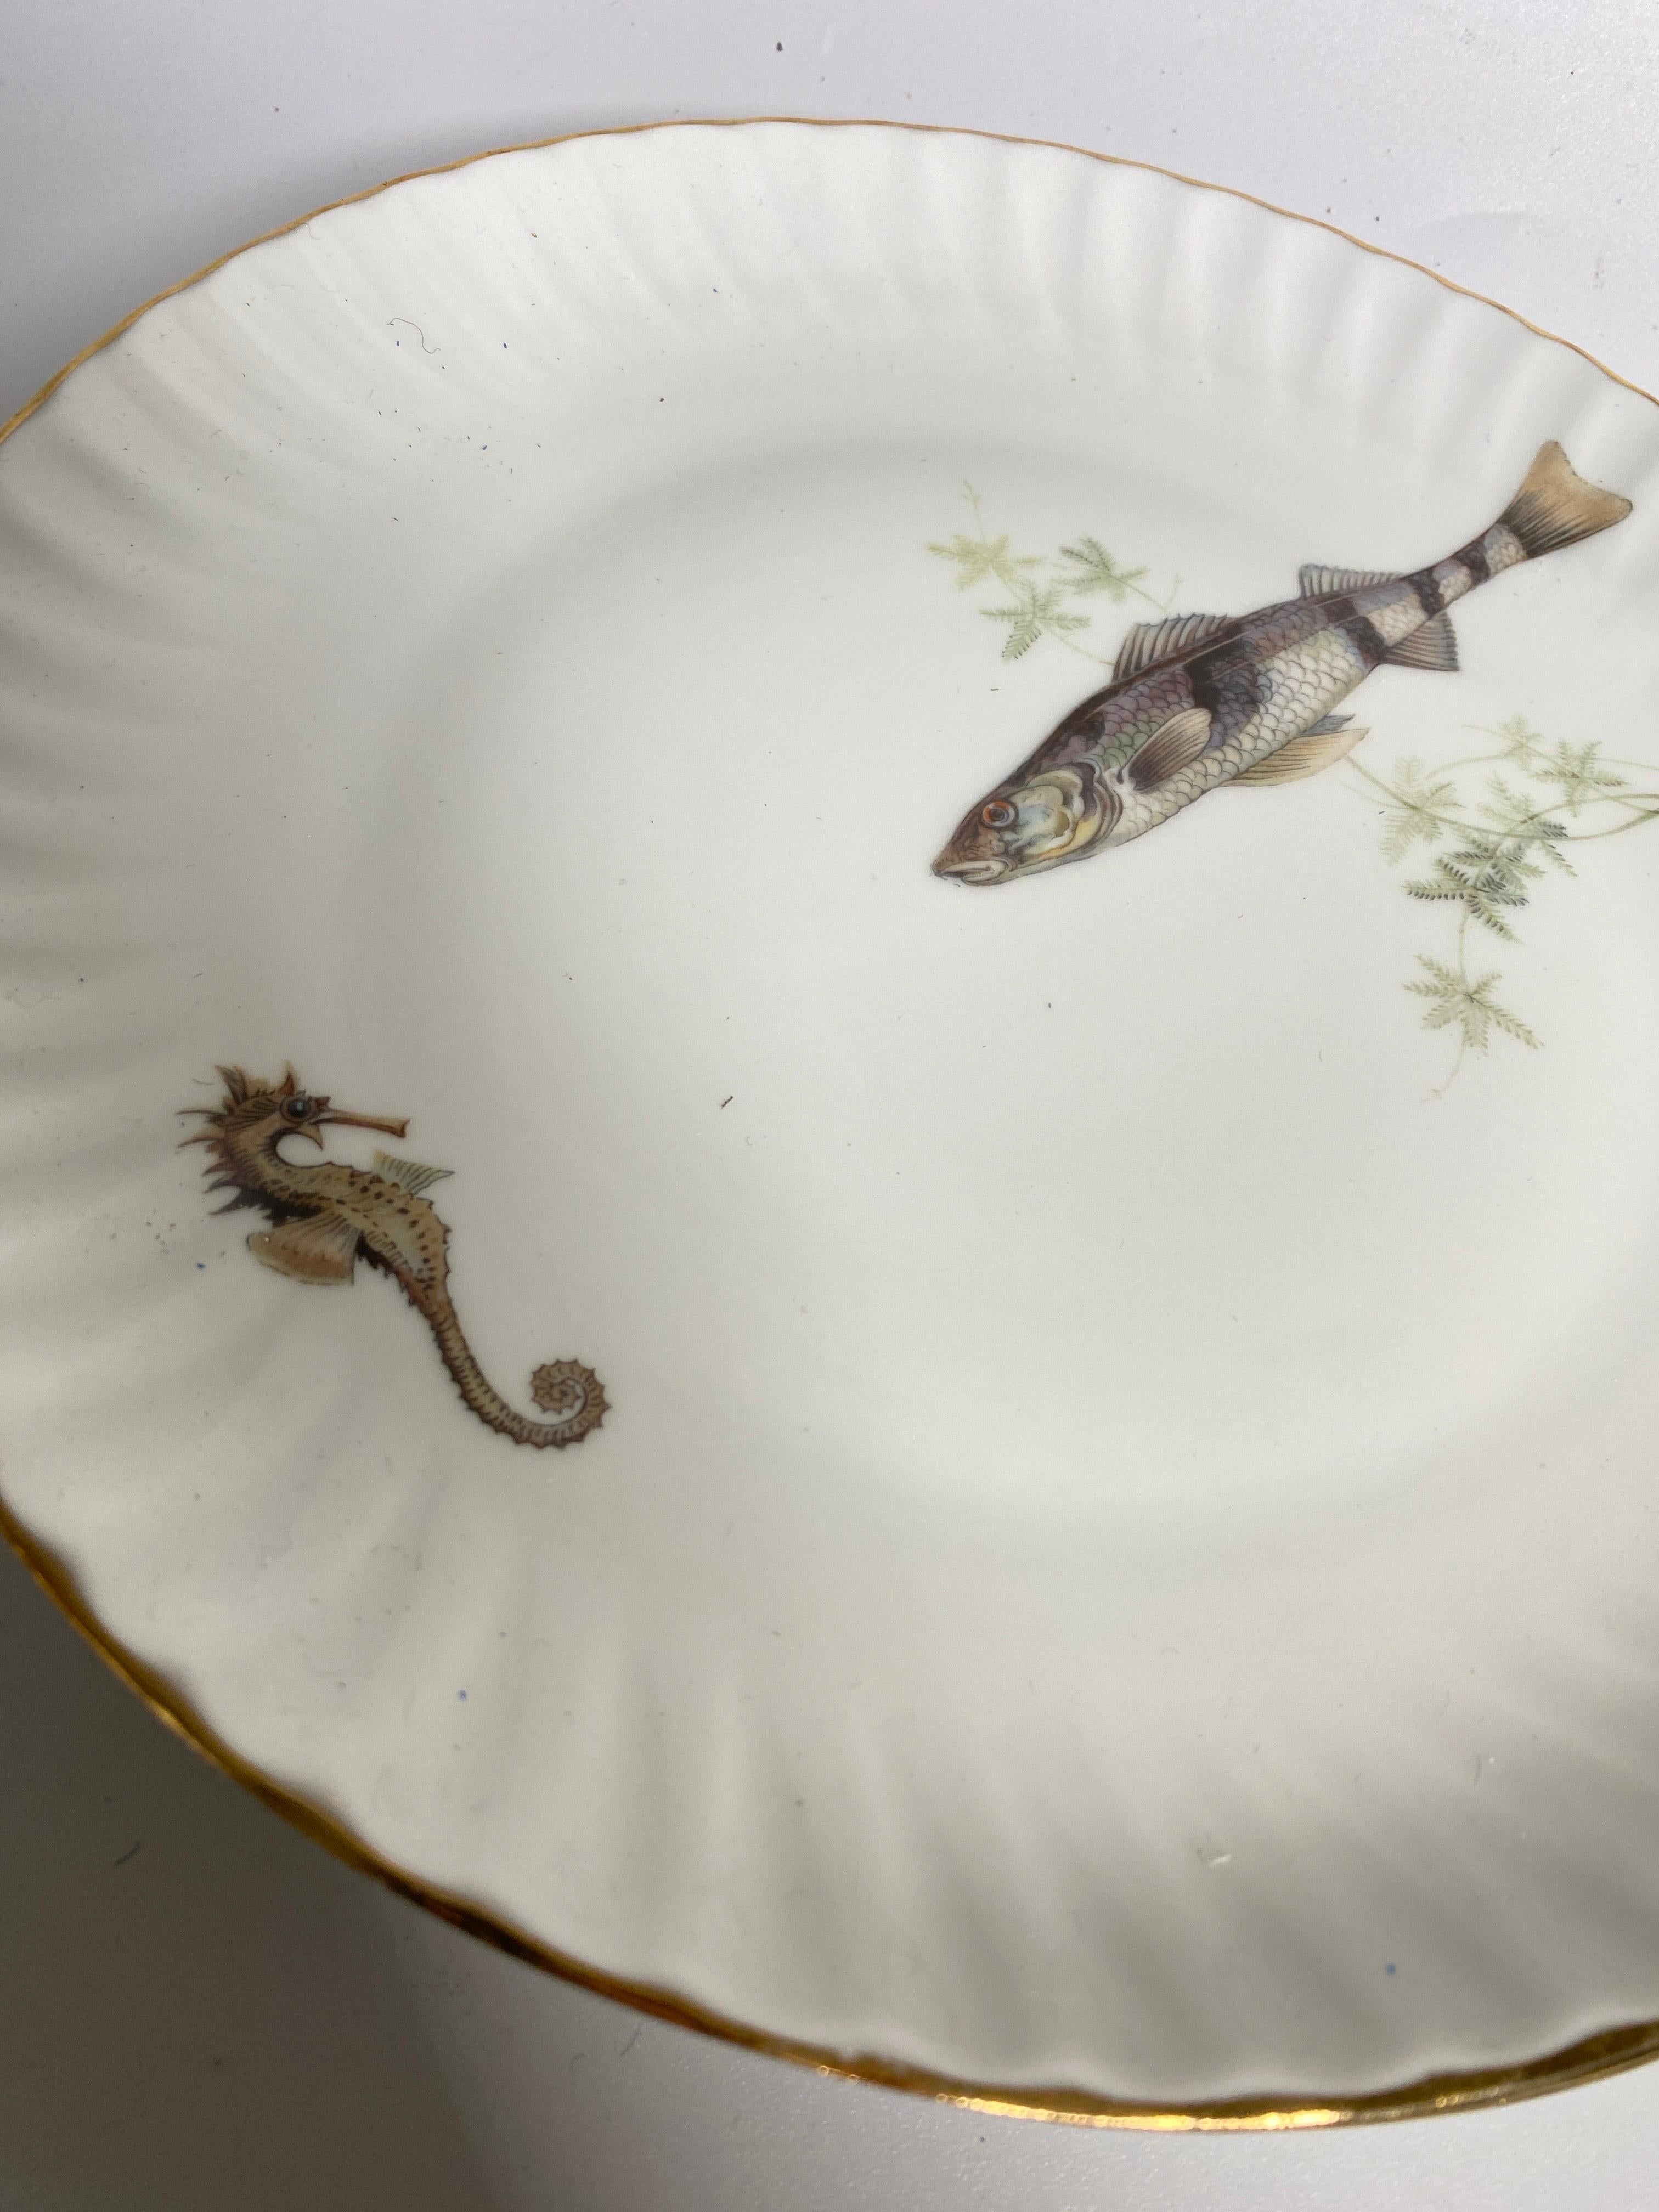 Porcelain fish service from the French brand Limoges. The service is decorated with all kinds of different images of fish. The service dates from around 1960. The porcelain is of a beautiful, refined quality. All parts are marked on the bottom. The